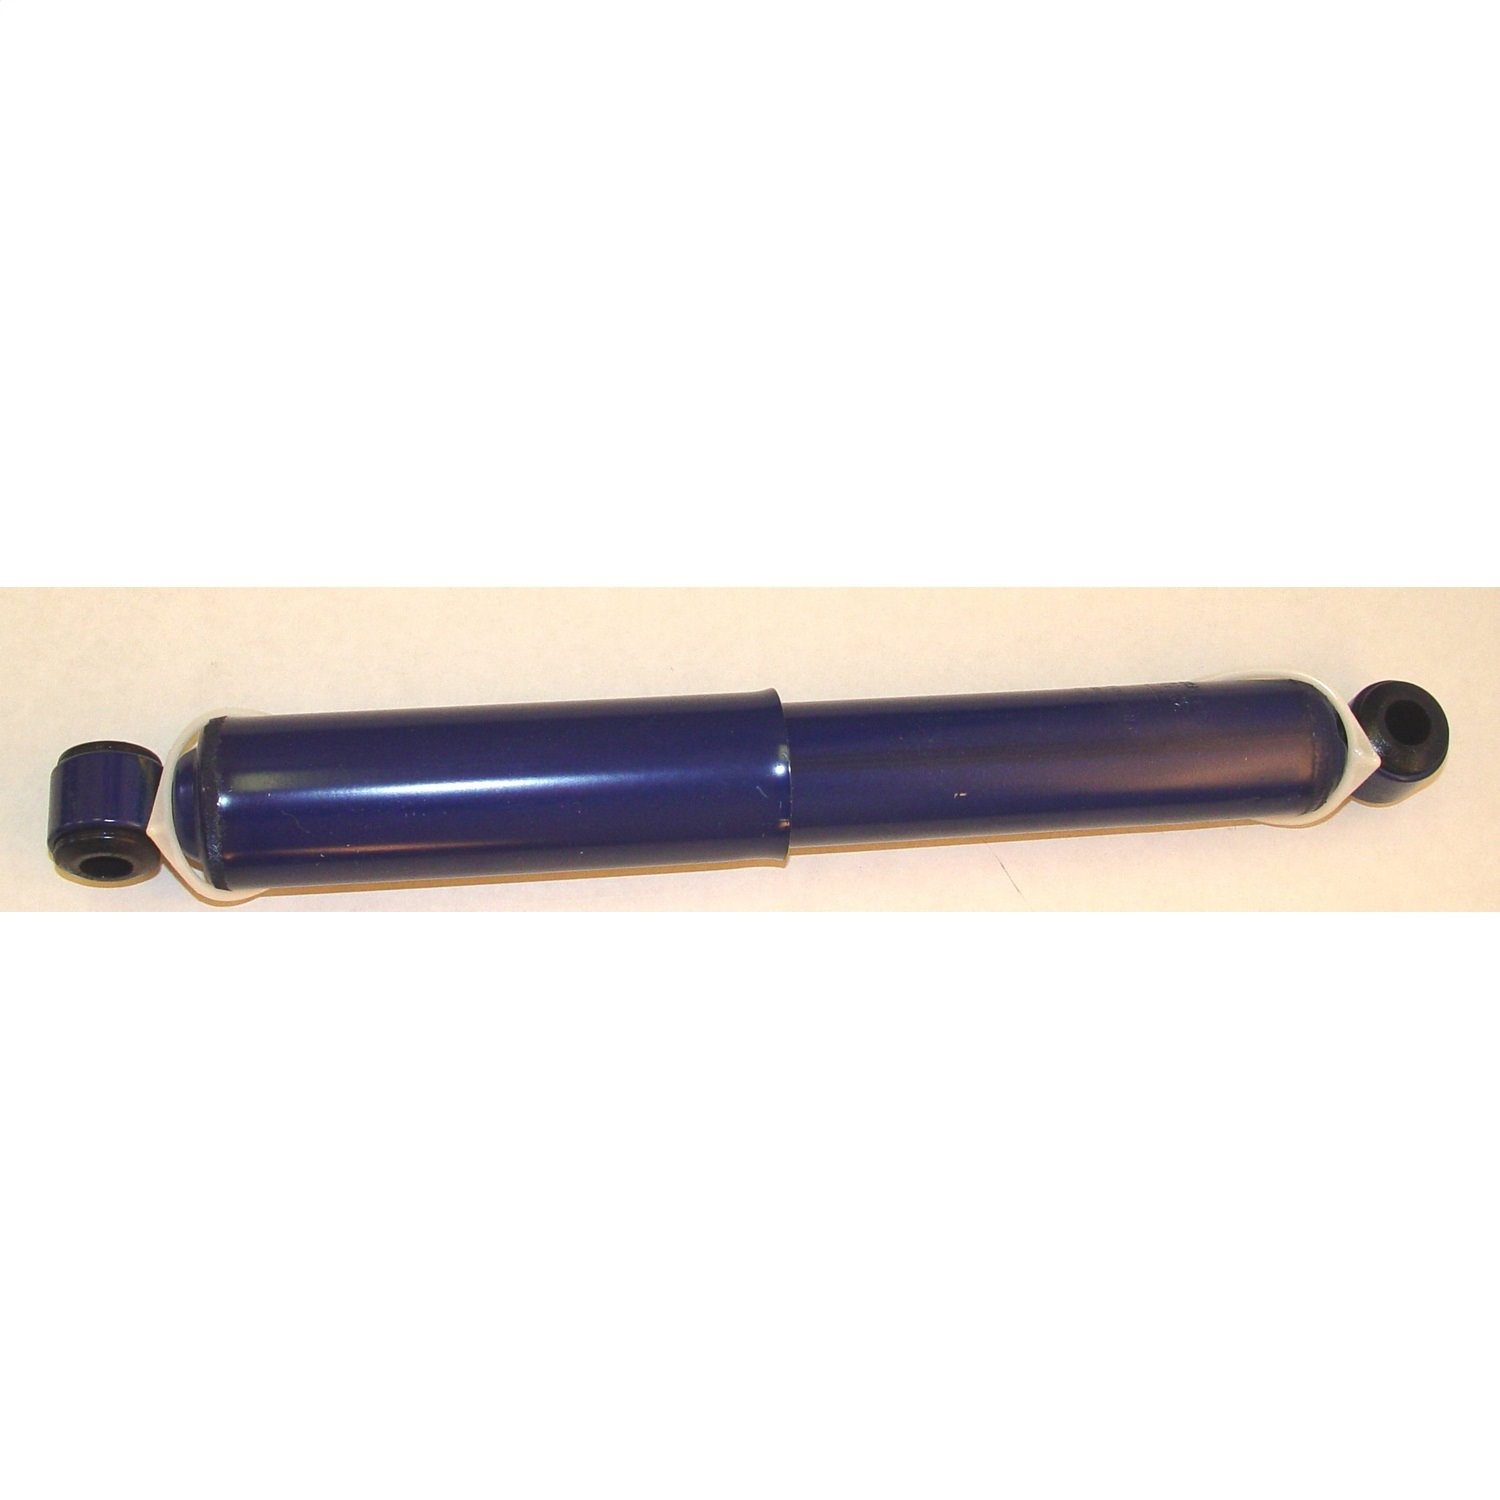 Heavy duty replacement shock absorber from Omix-ADA, Fits